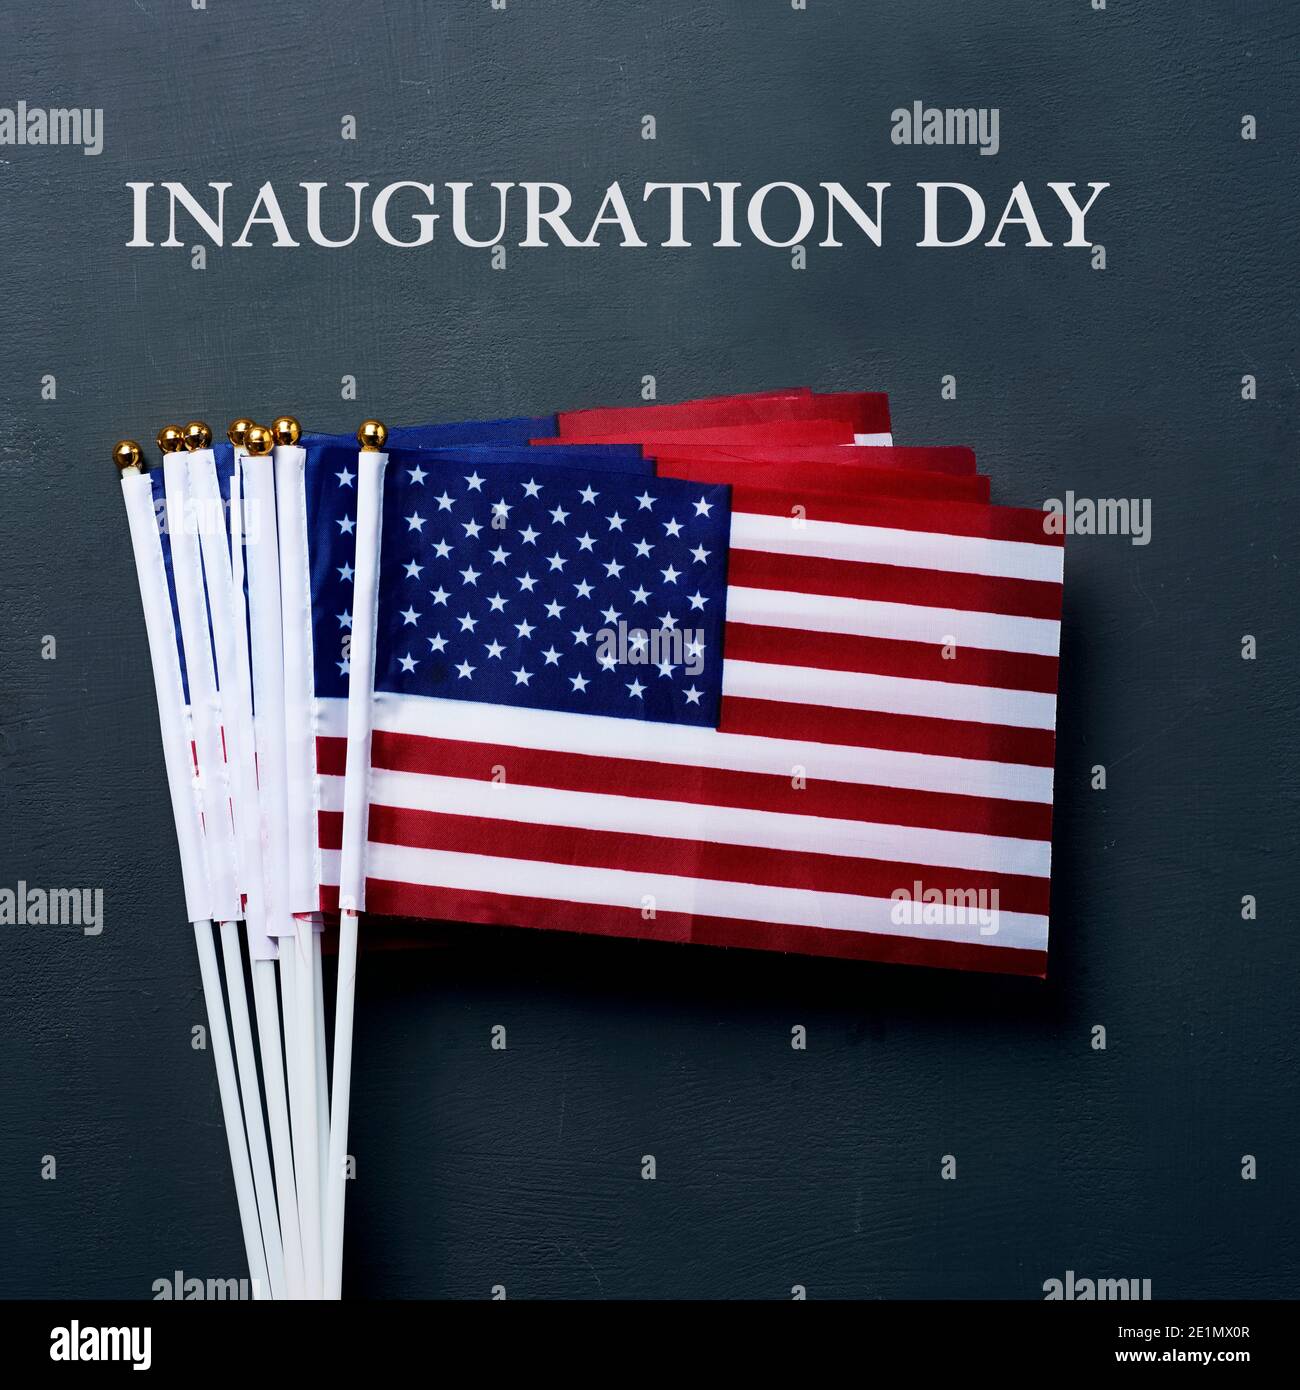 the text inauguration day and some american flags on a dark gray background Stock Photo